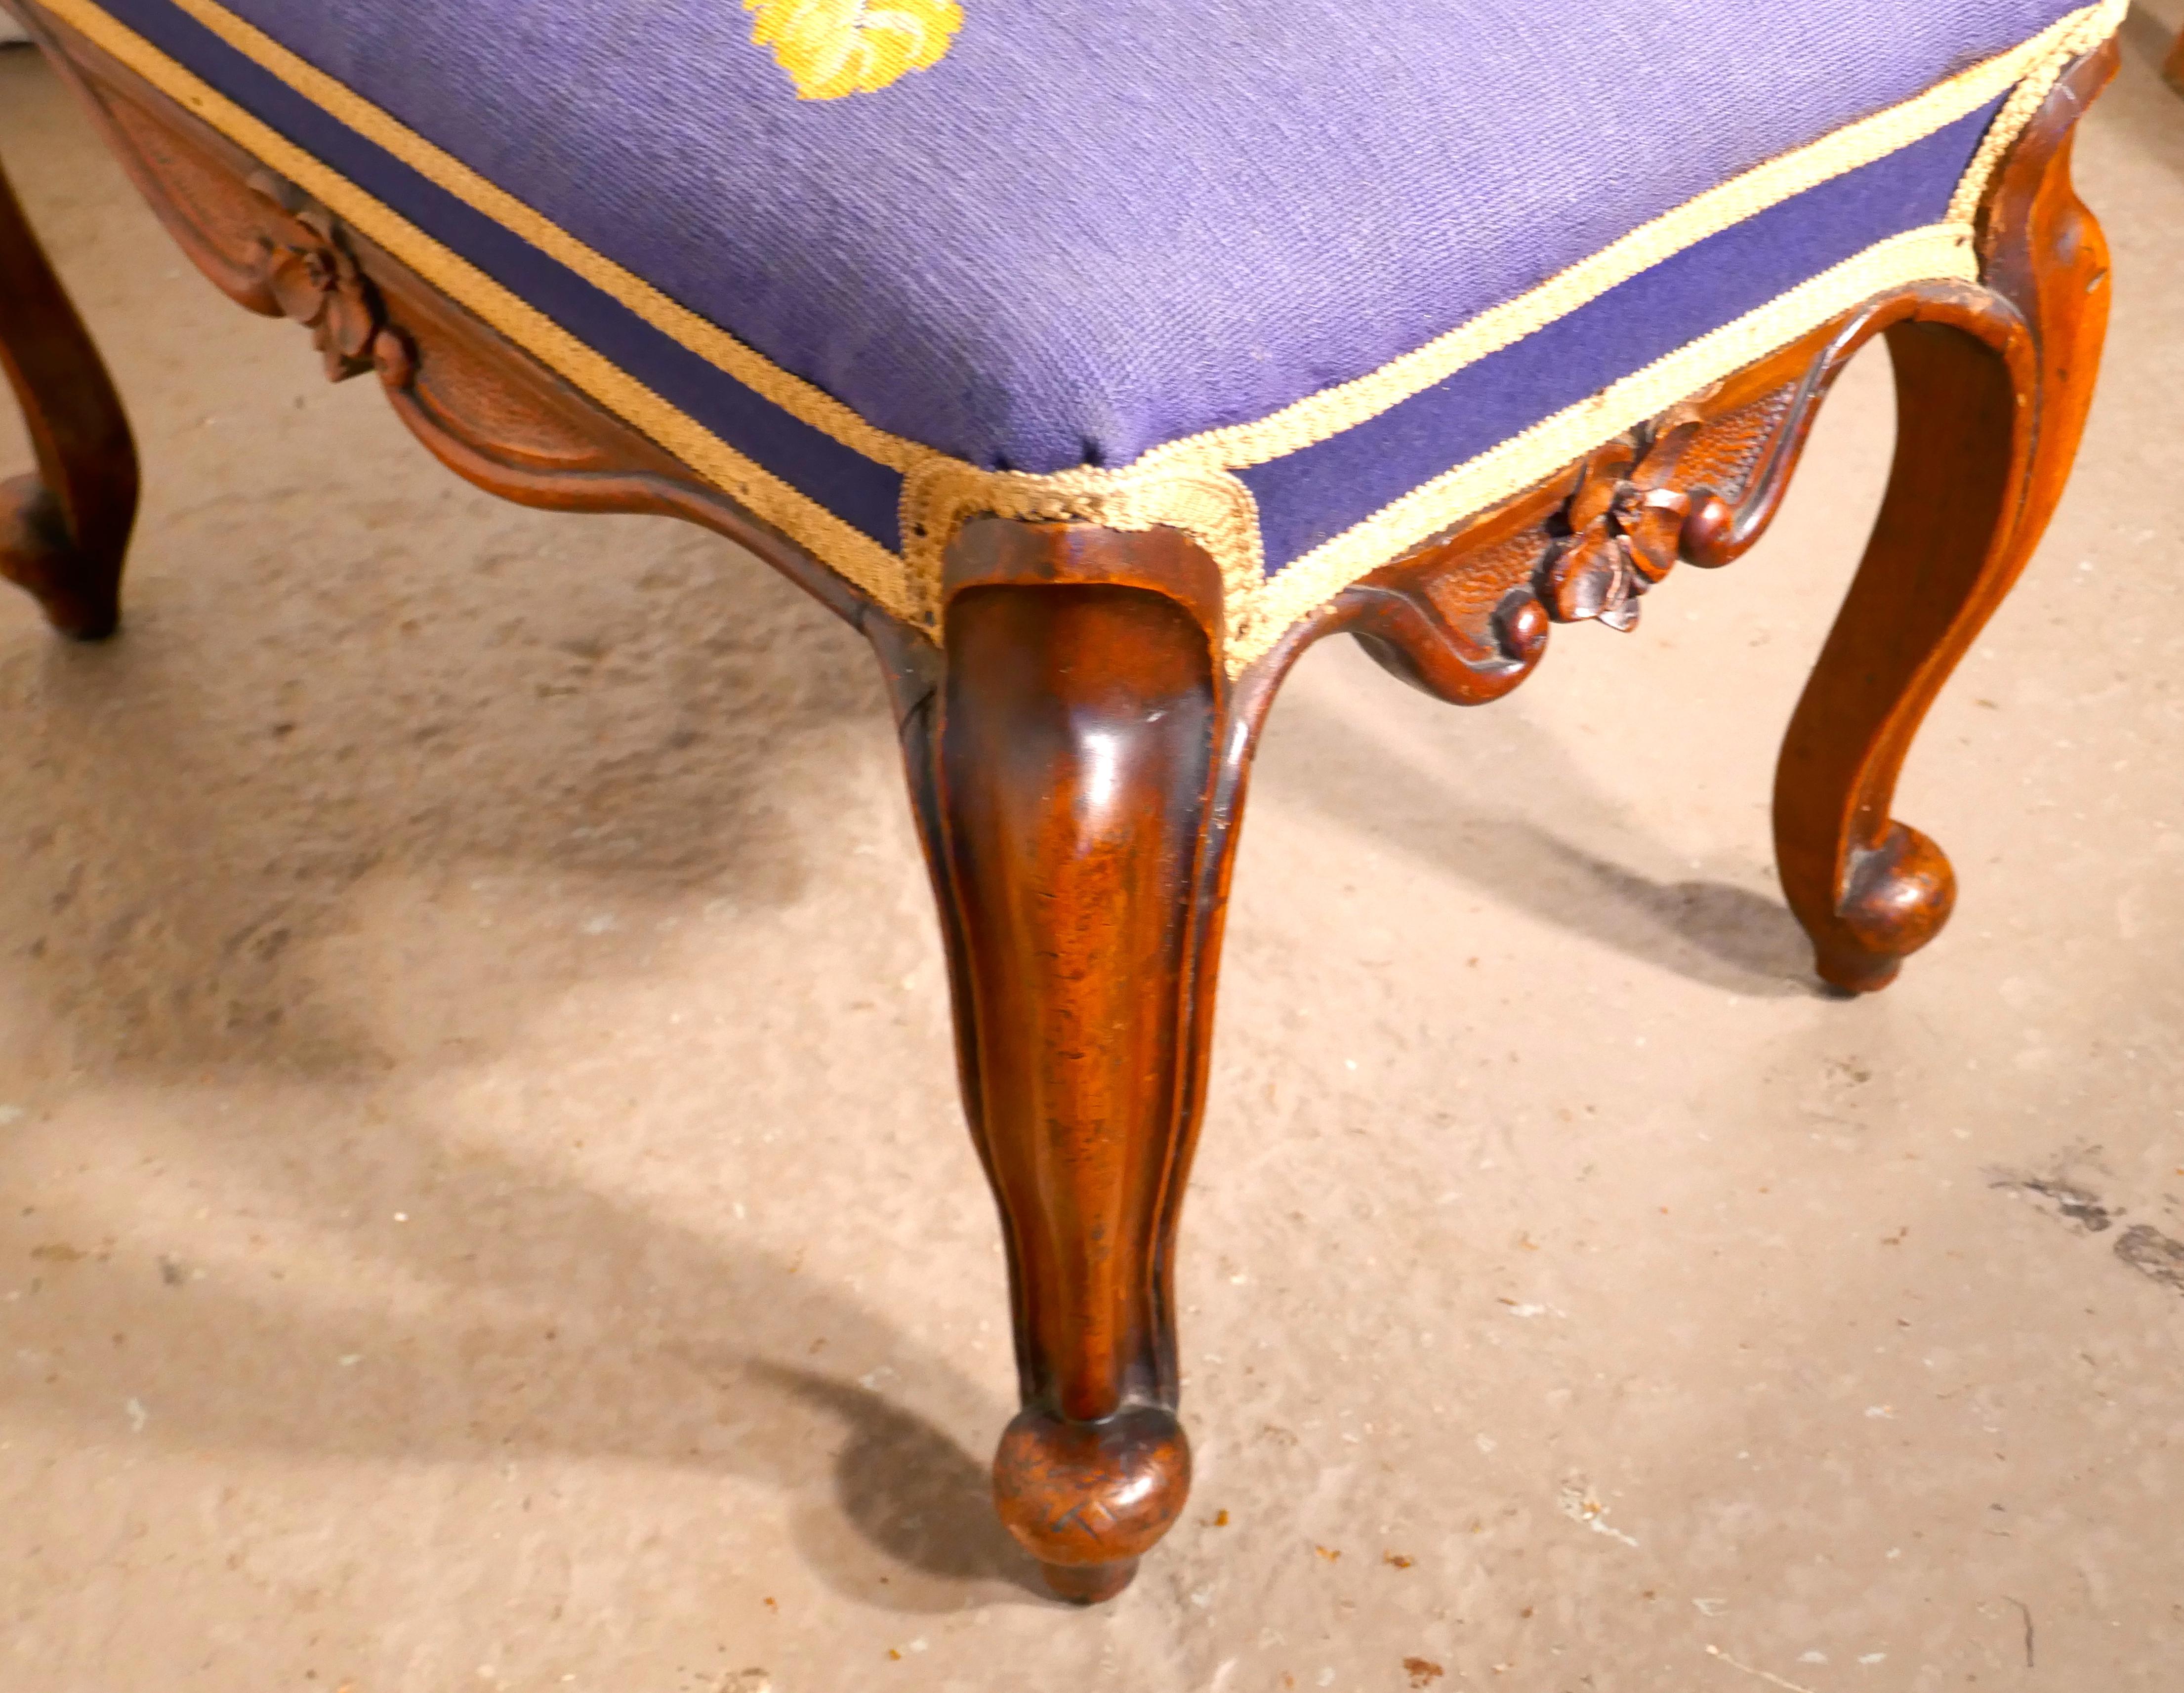 Victorian petit point tapestry upholstered mahogany stool

A lovely piece, this Victorian stool is made in Mahogany, it stands on decorative carved Cabriole legs and has a floral embroidered seat on a blue background
The seat is original 19th